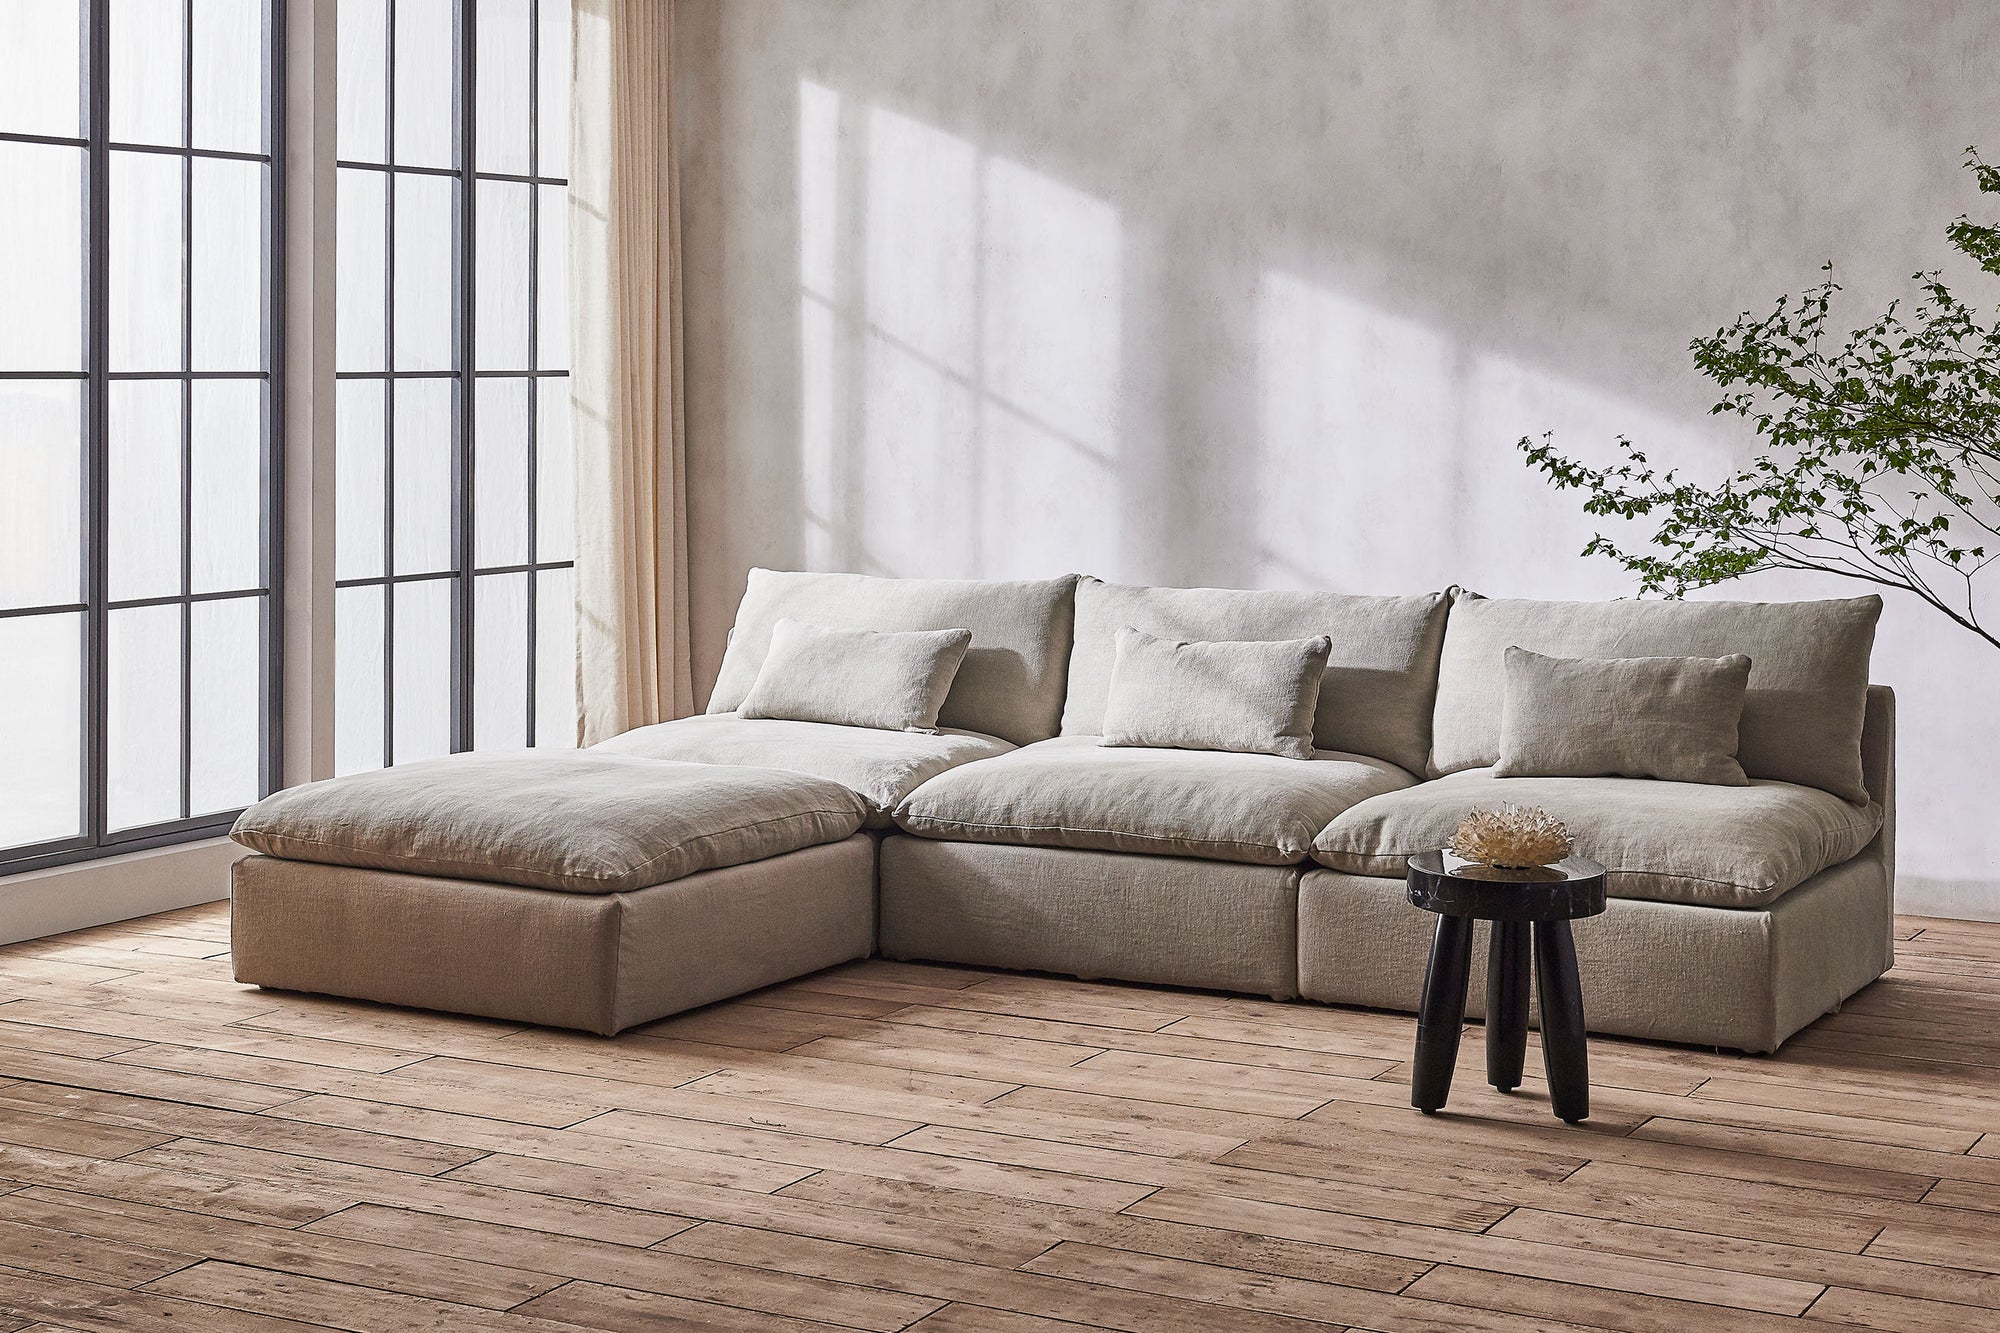 Aria 4-piece Chaise Sectional Sofa in Jasmine Rice, a light warm greige Medium Weight Linen, placed in a sunlit room next to a stool